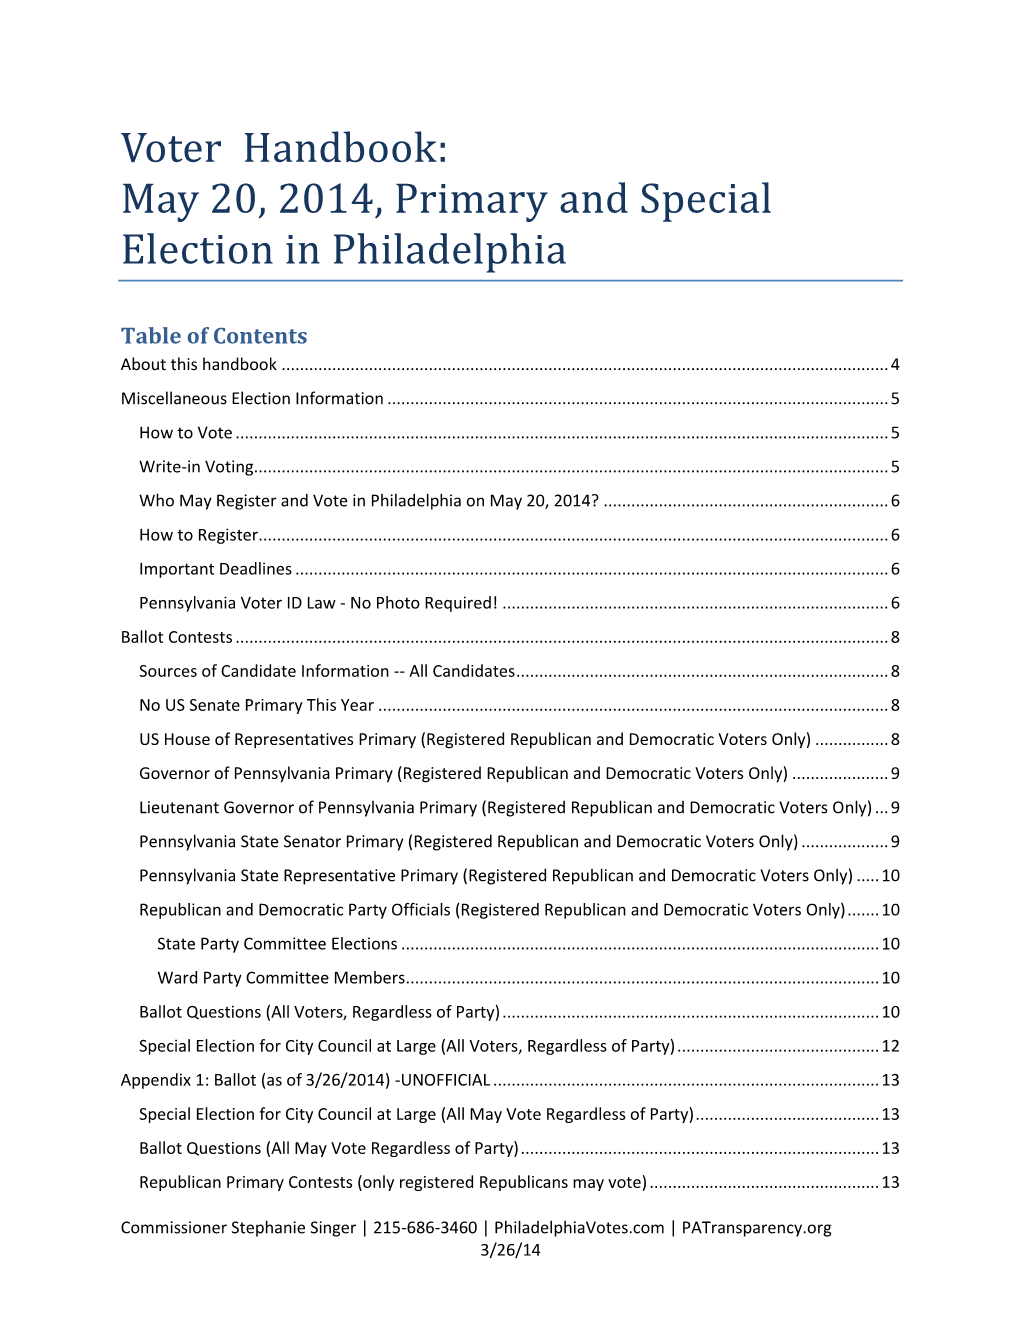 Voter Handbook: May 20, 2014, Primary and Special Election in Philadelphia